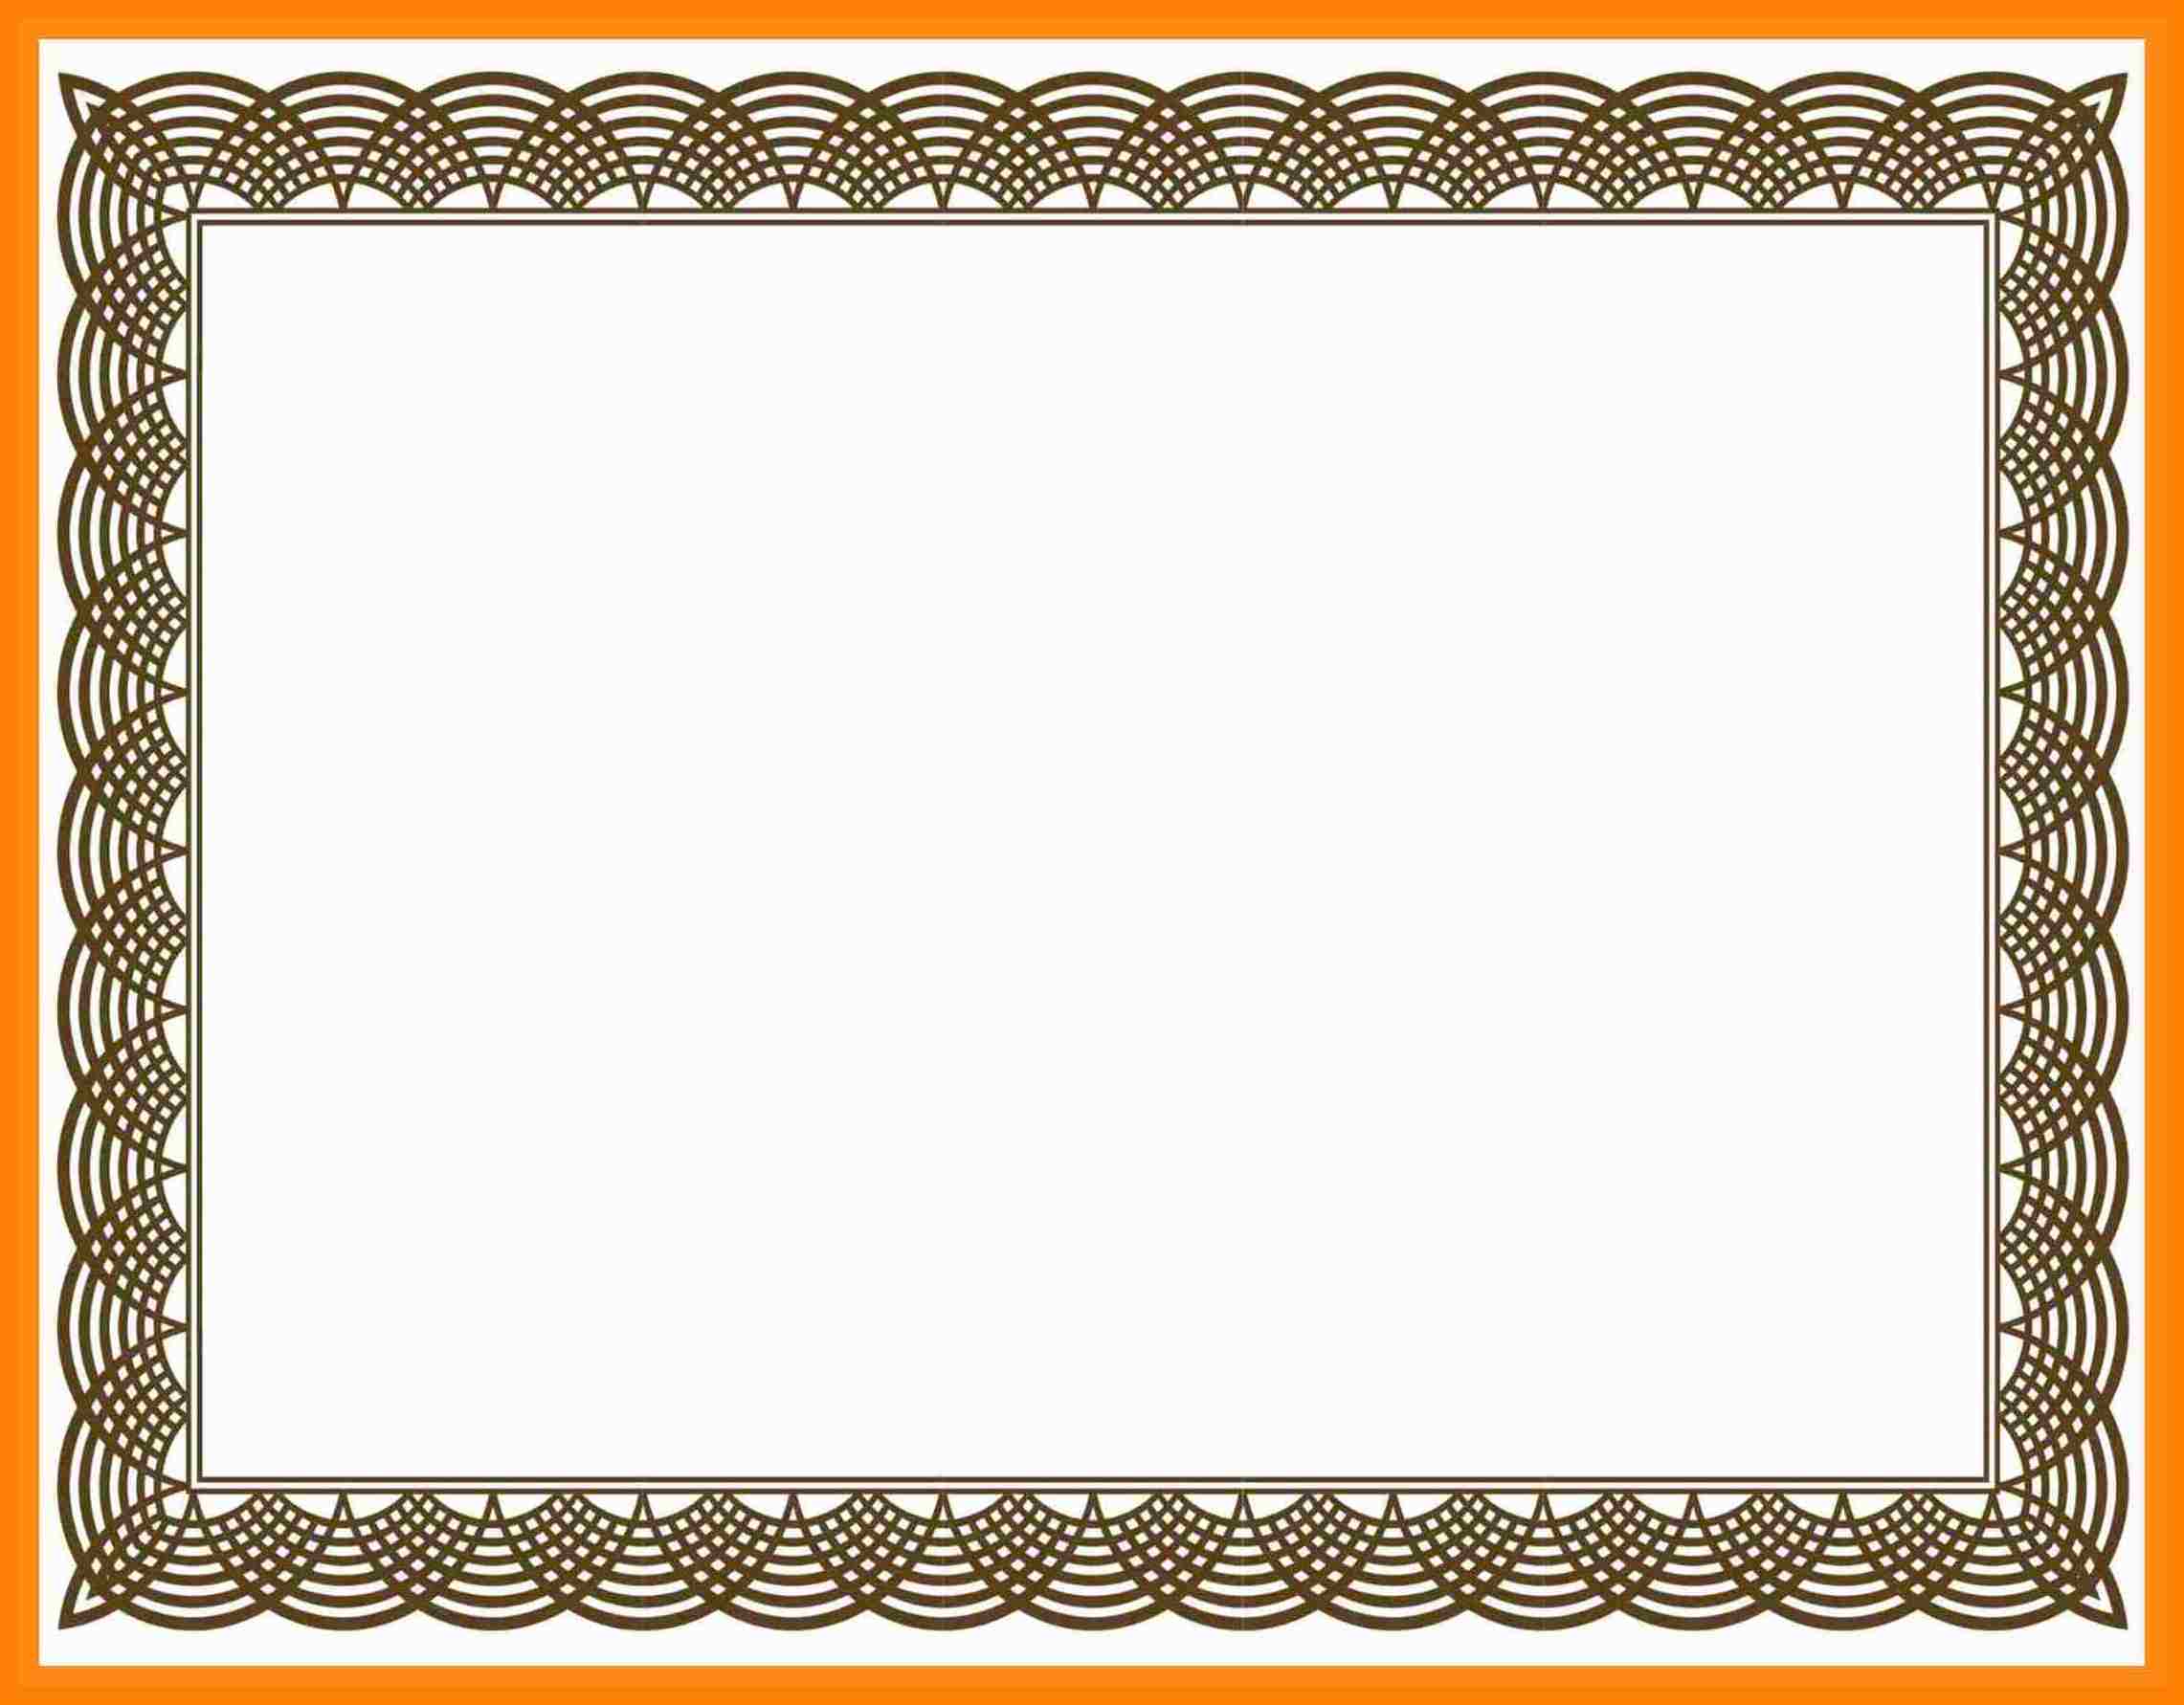 certificate border template word free download